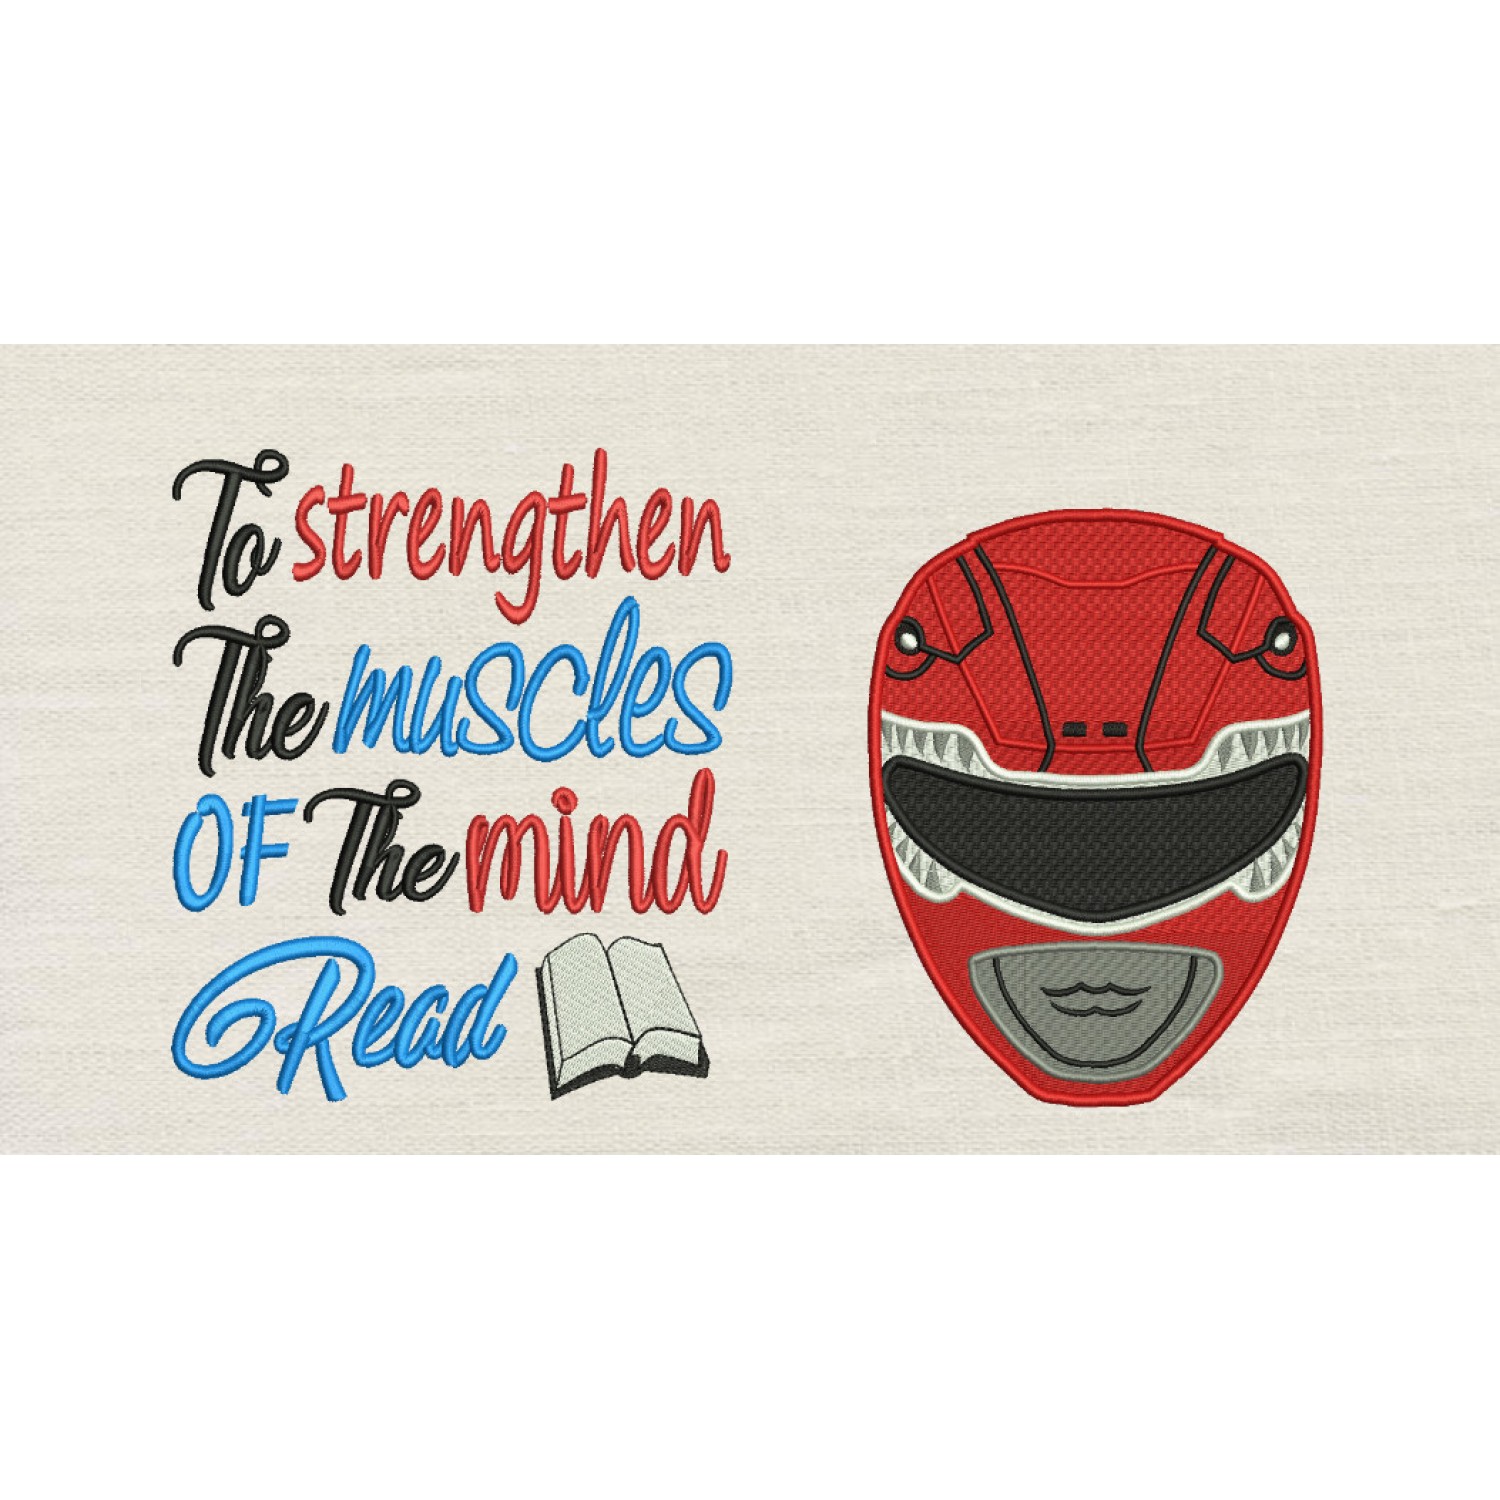 Power Ranger Embroidery with To strengthen